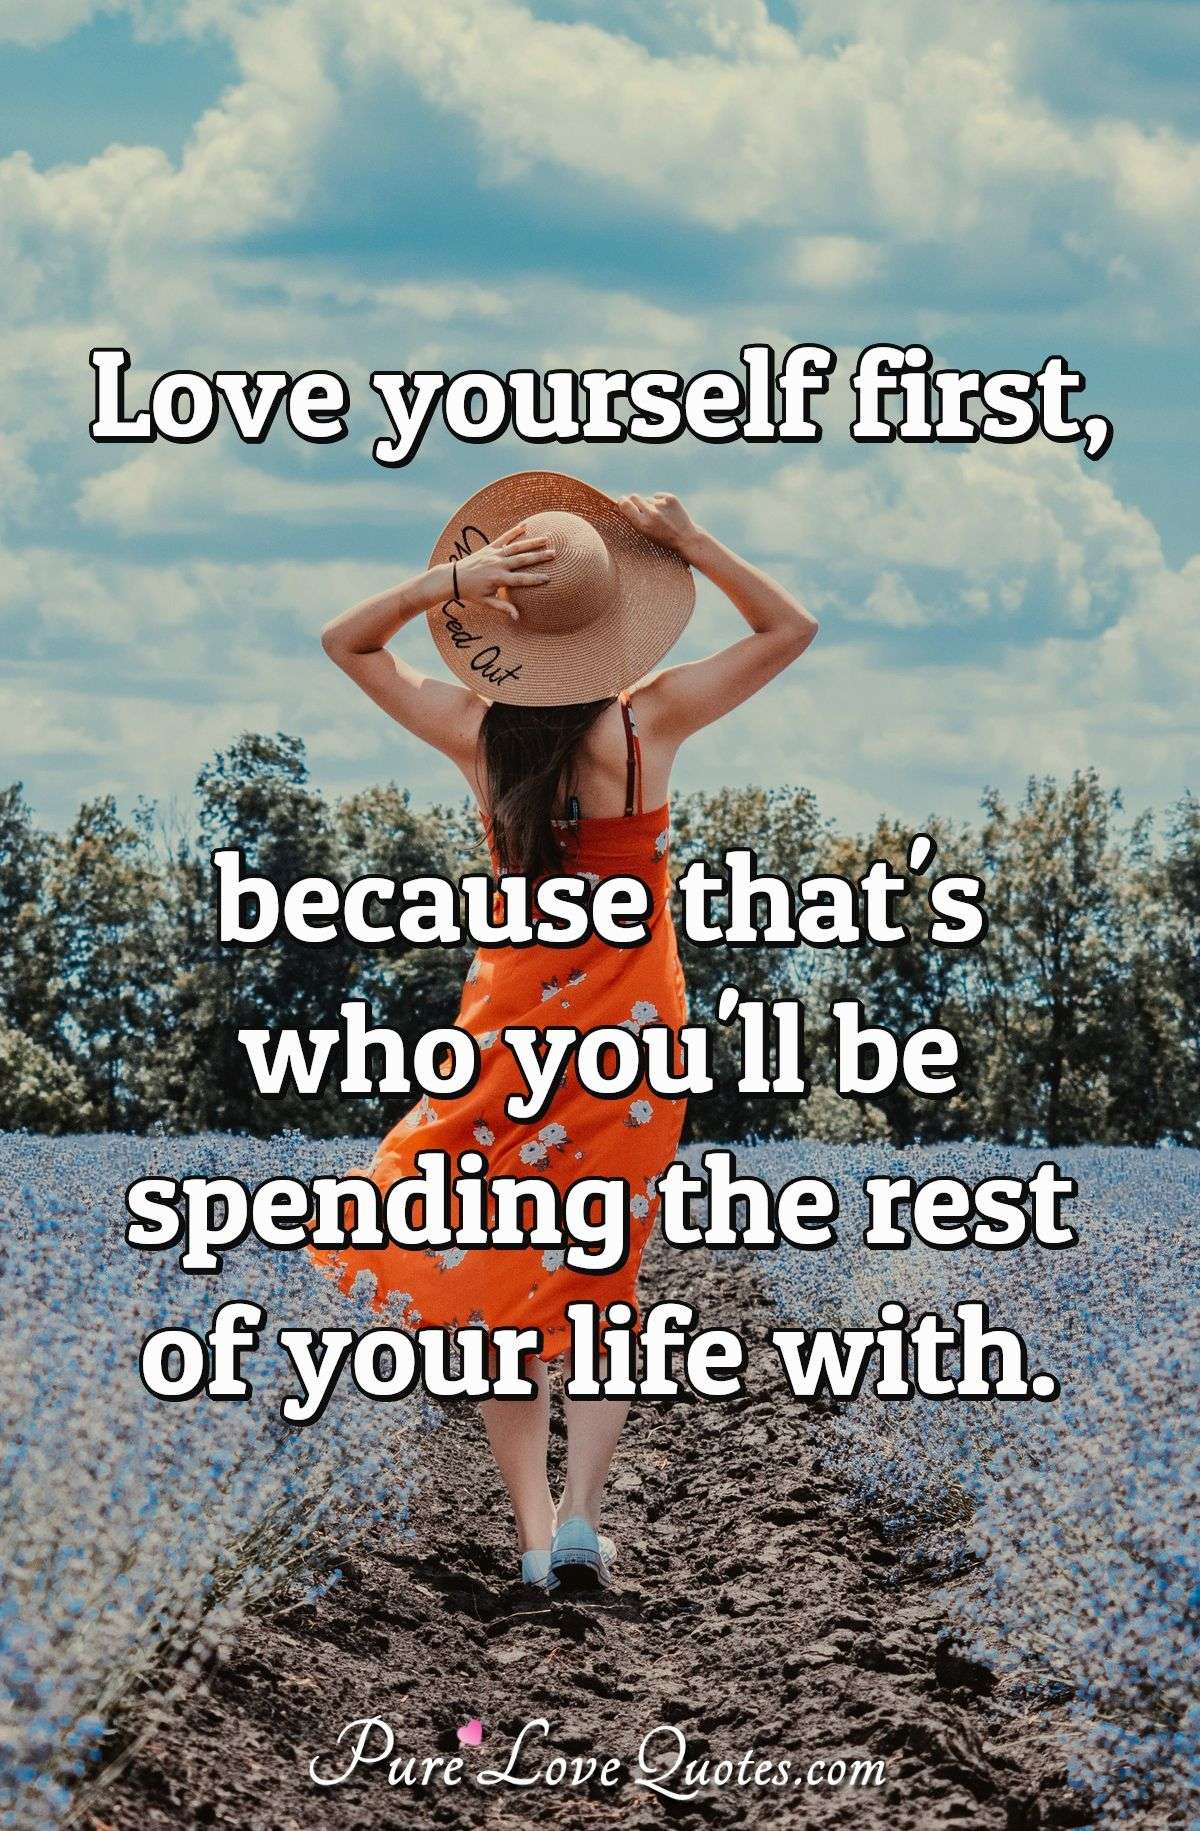 Love yourself first, because that's who you'll be spending the rest of your life with. - Anonymous